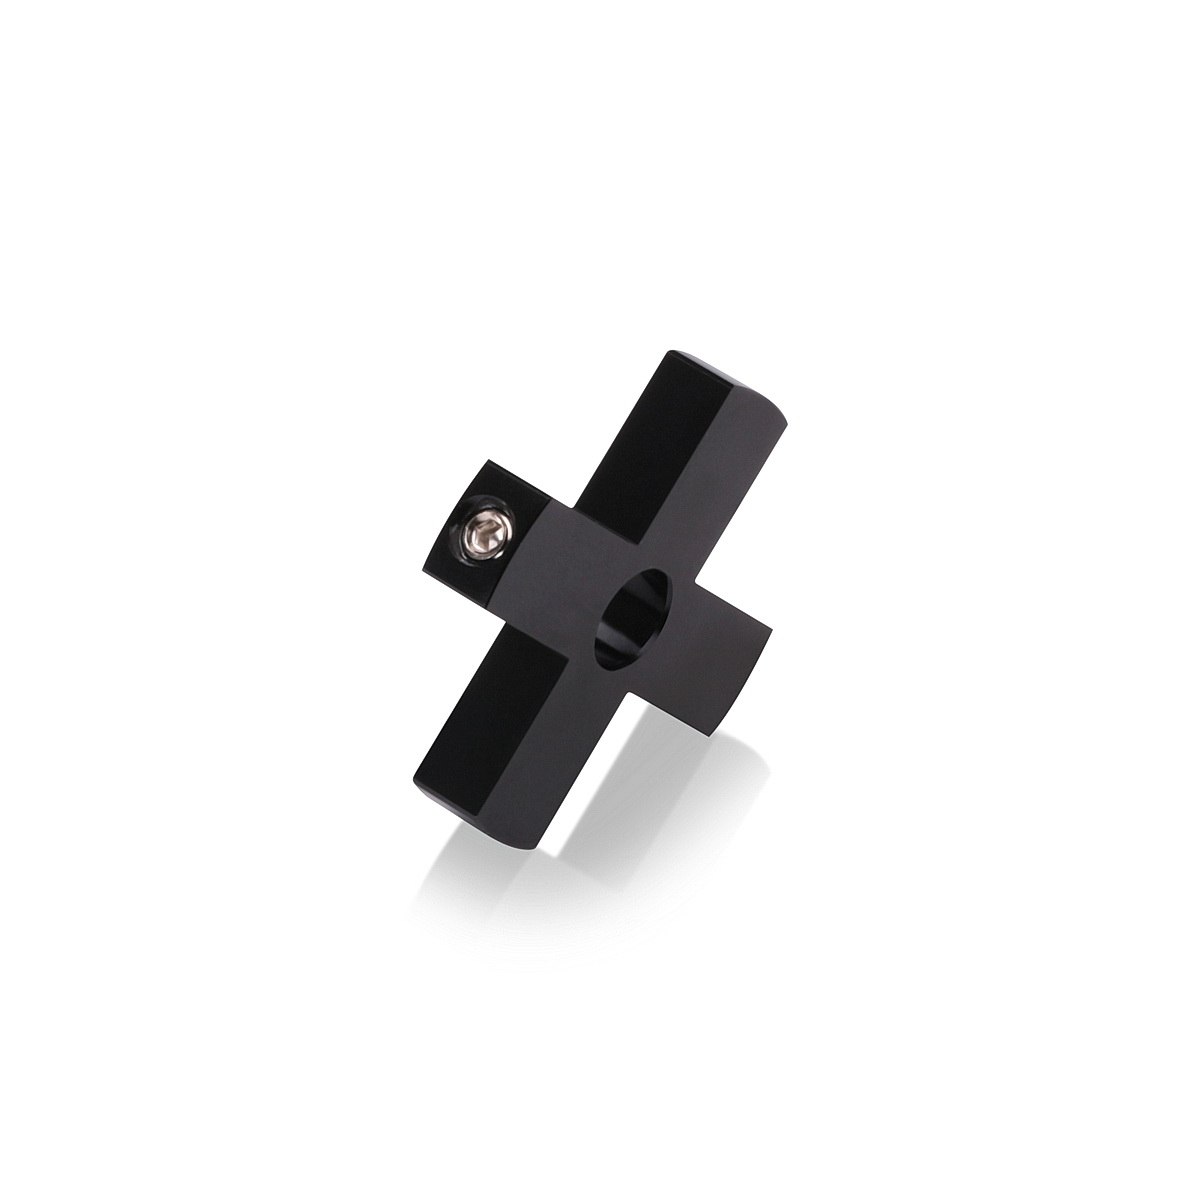 4-Way Standoffs Hub, Diameter: 1 1/2'', Thickness: 1/4'', Black Anodized Aluminum [Required Material Hole Size: 7/16'']